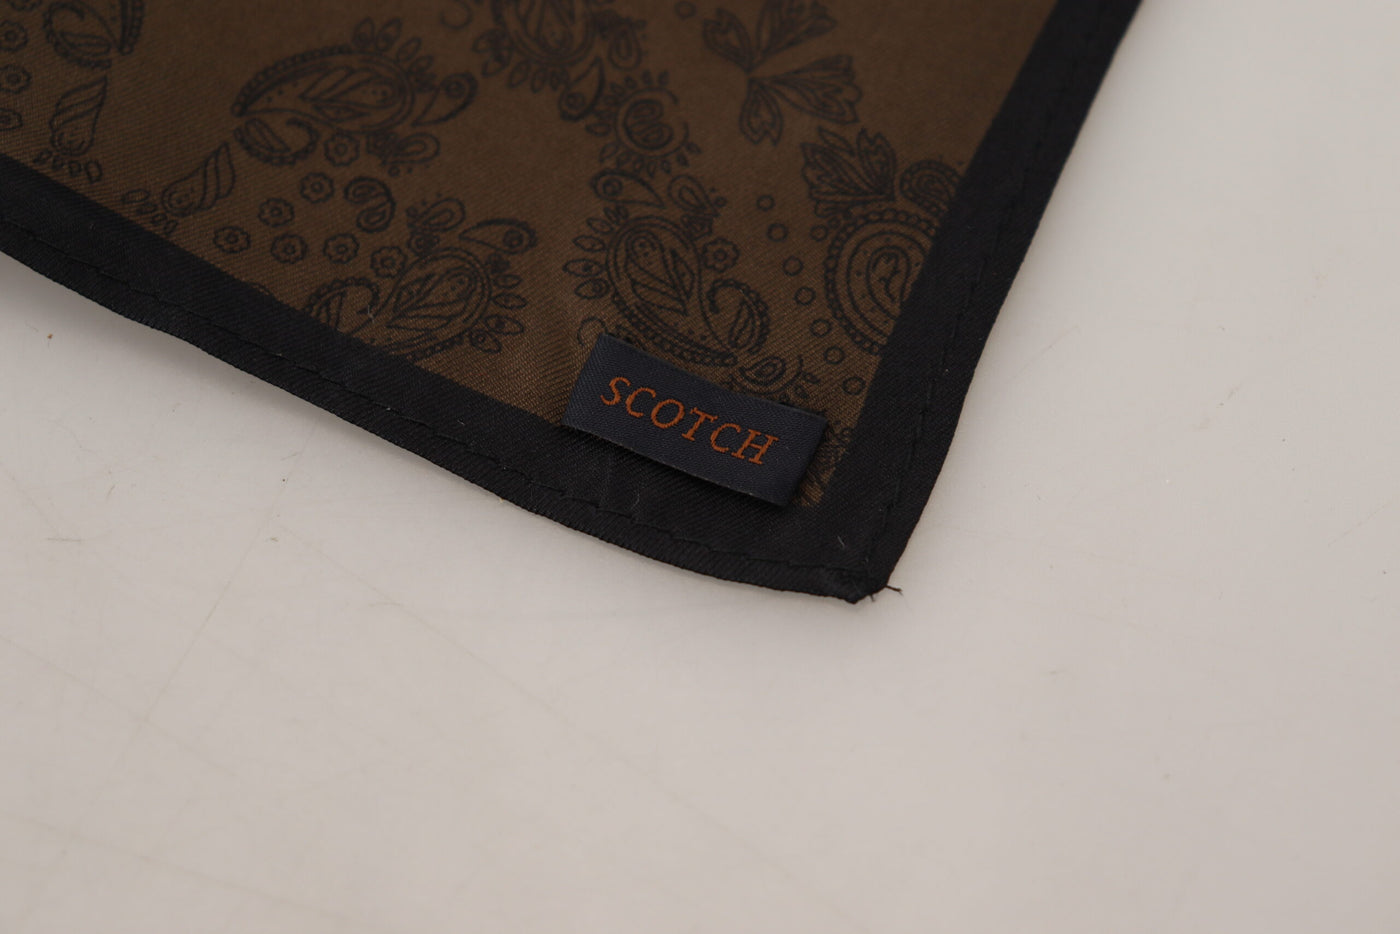 Scotch & Soda Brown Patterned Wrap Square Handkerchief Scarf